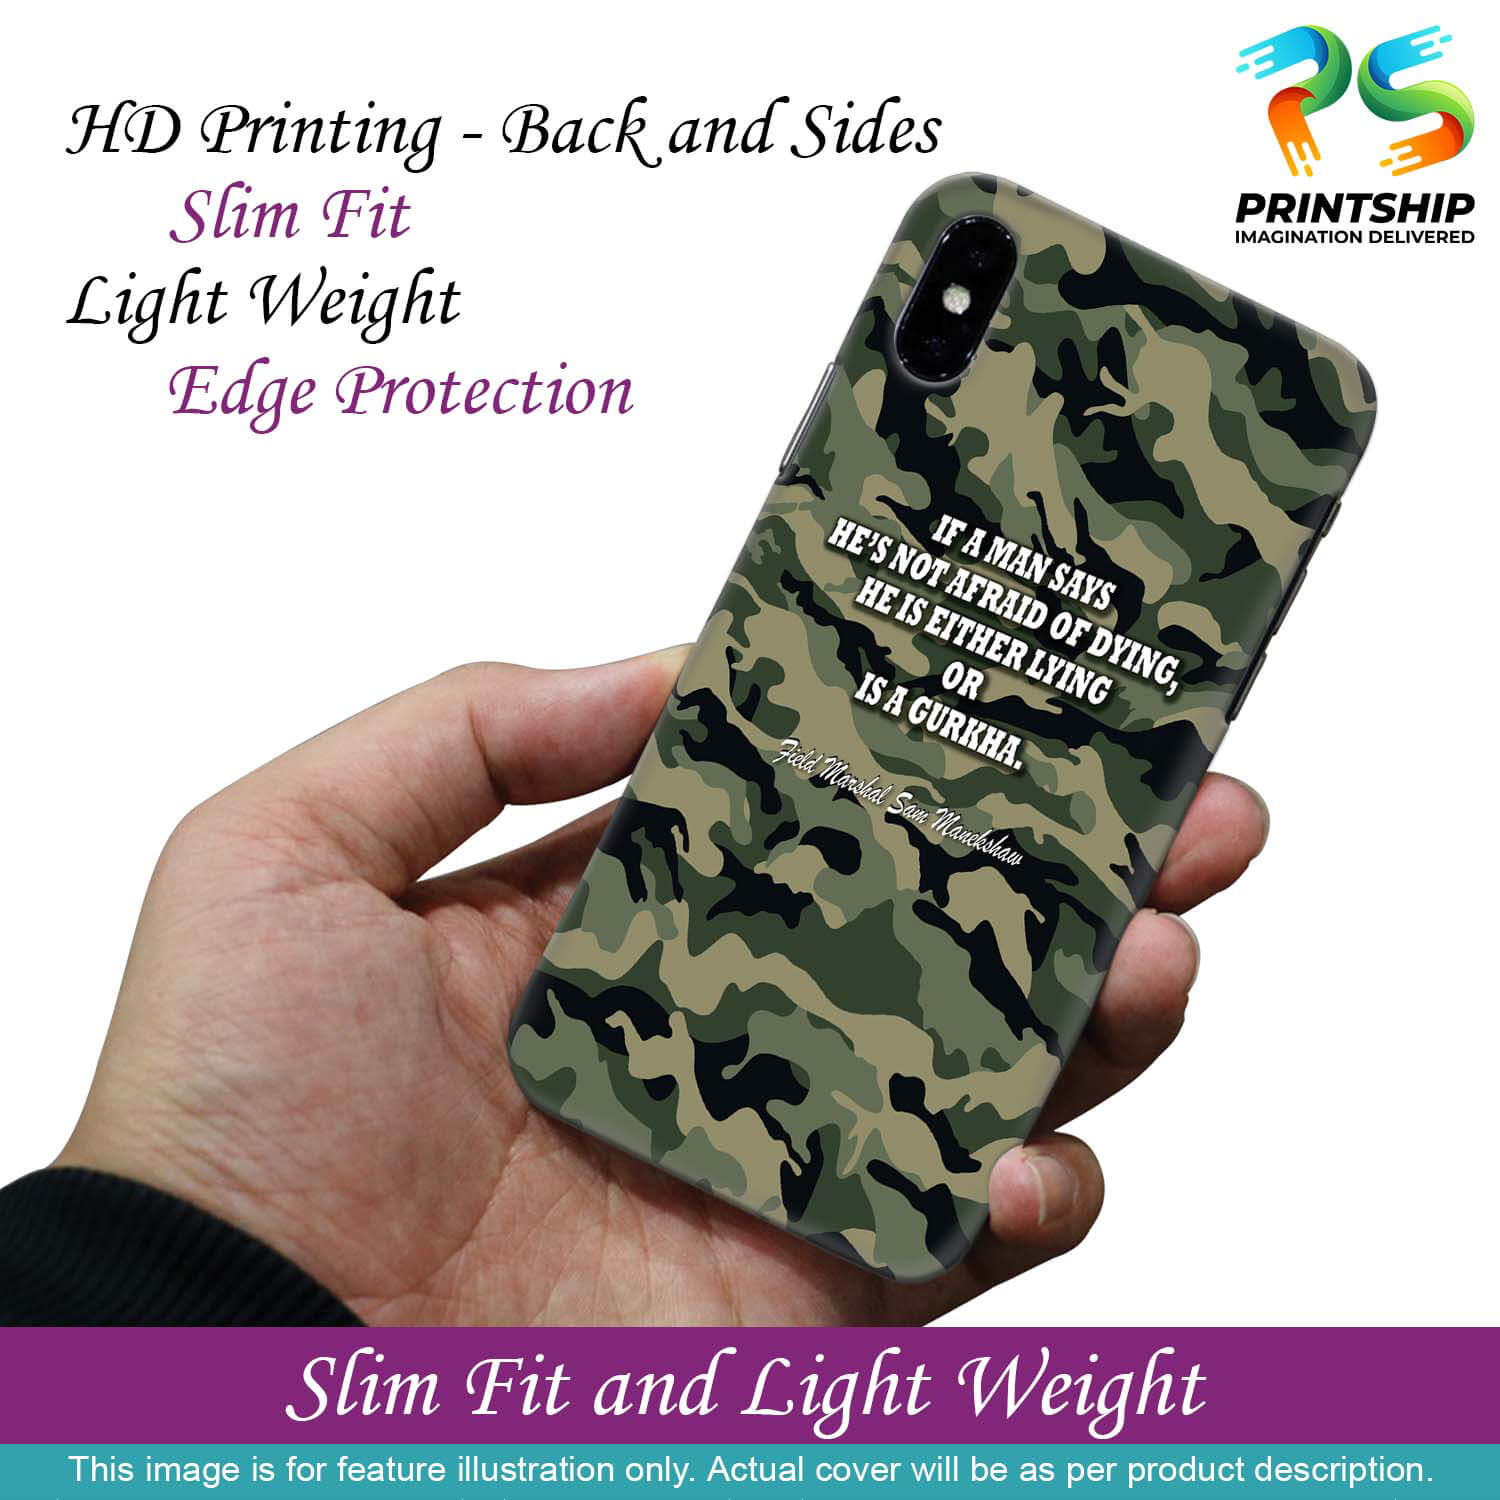 W0450-Indian Army Quote Back Cover for Realme 6i